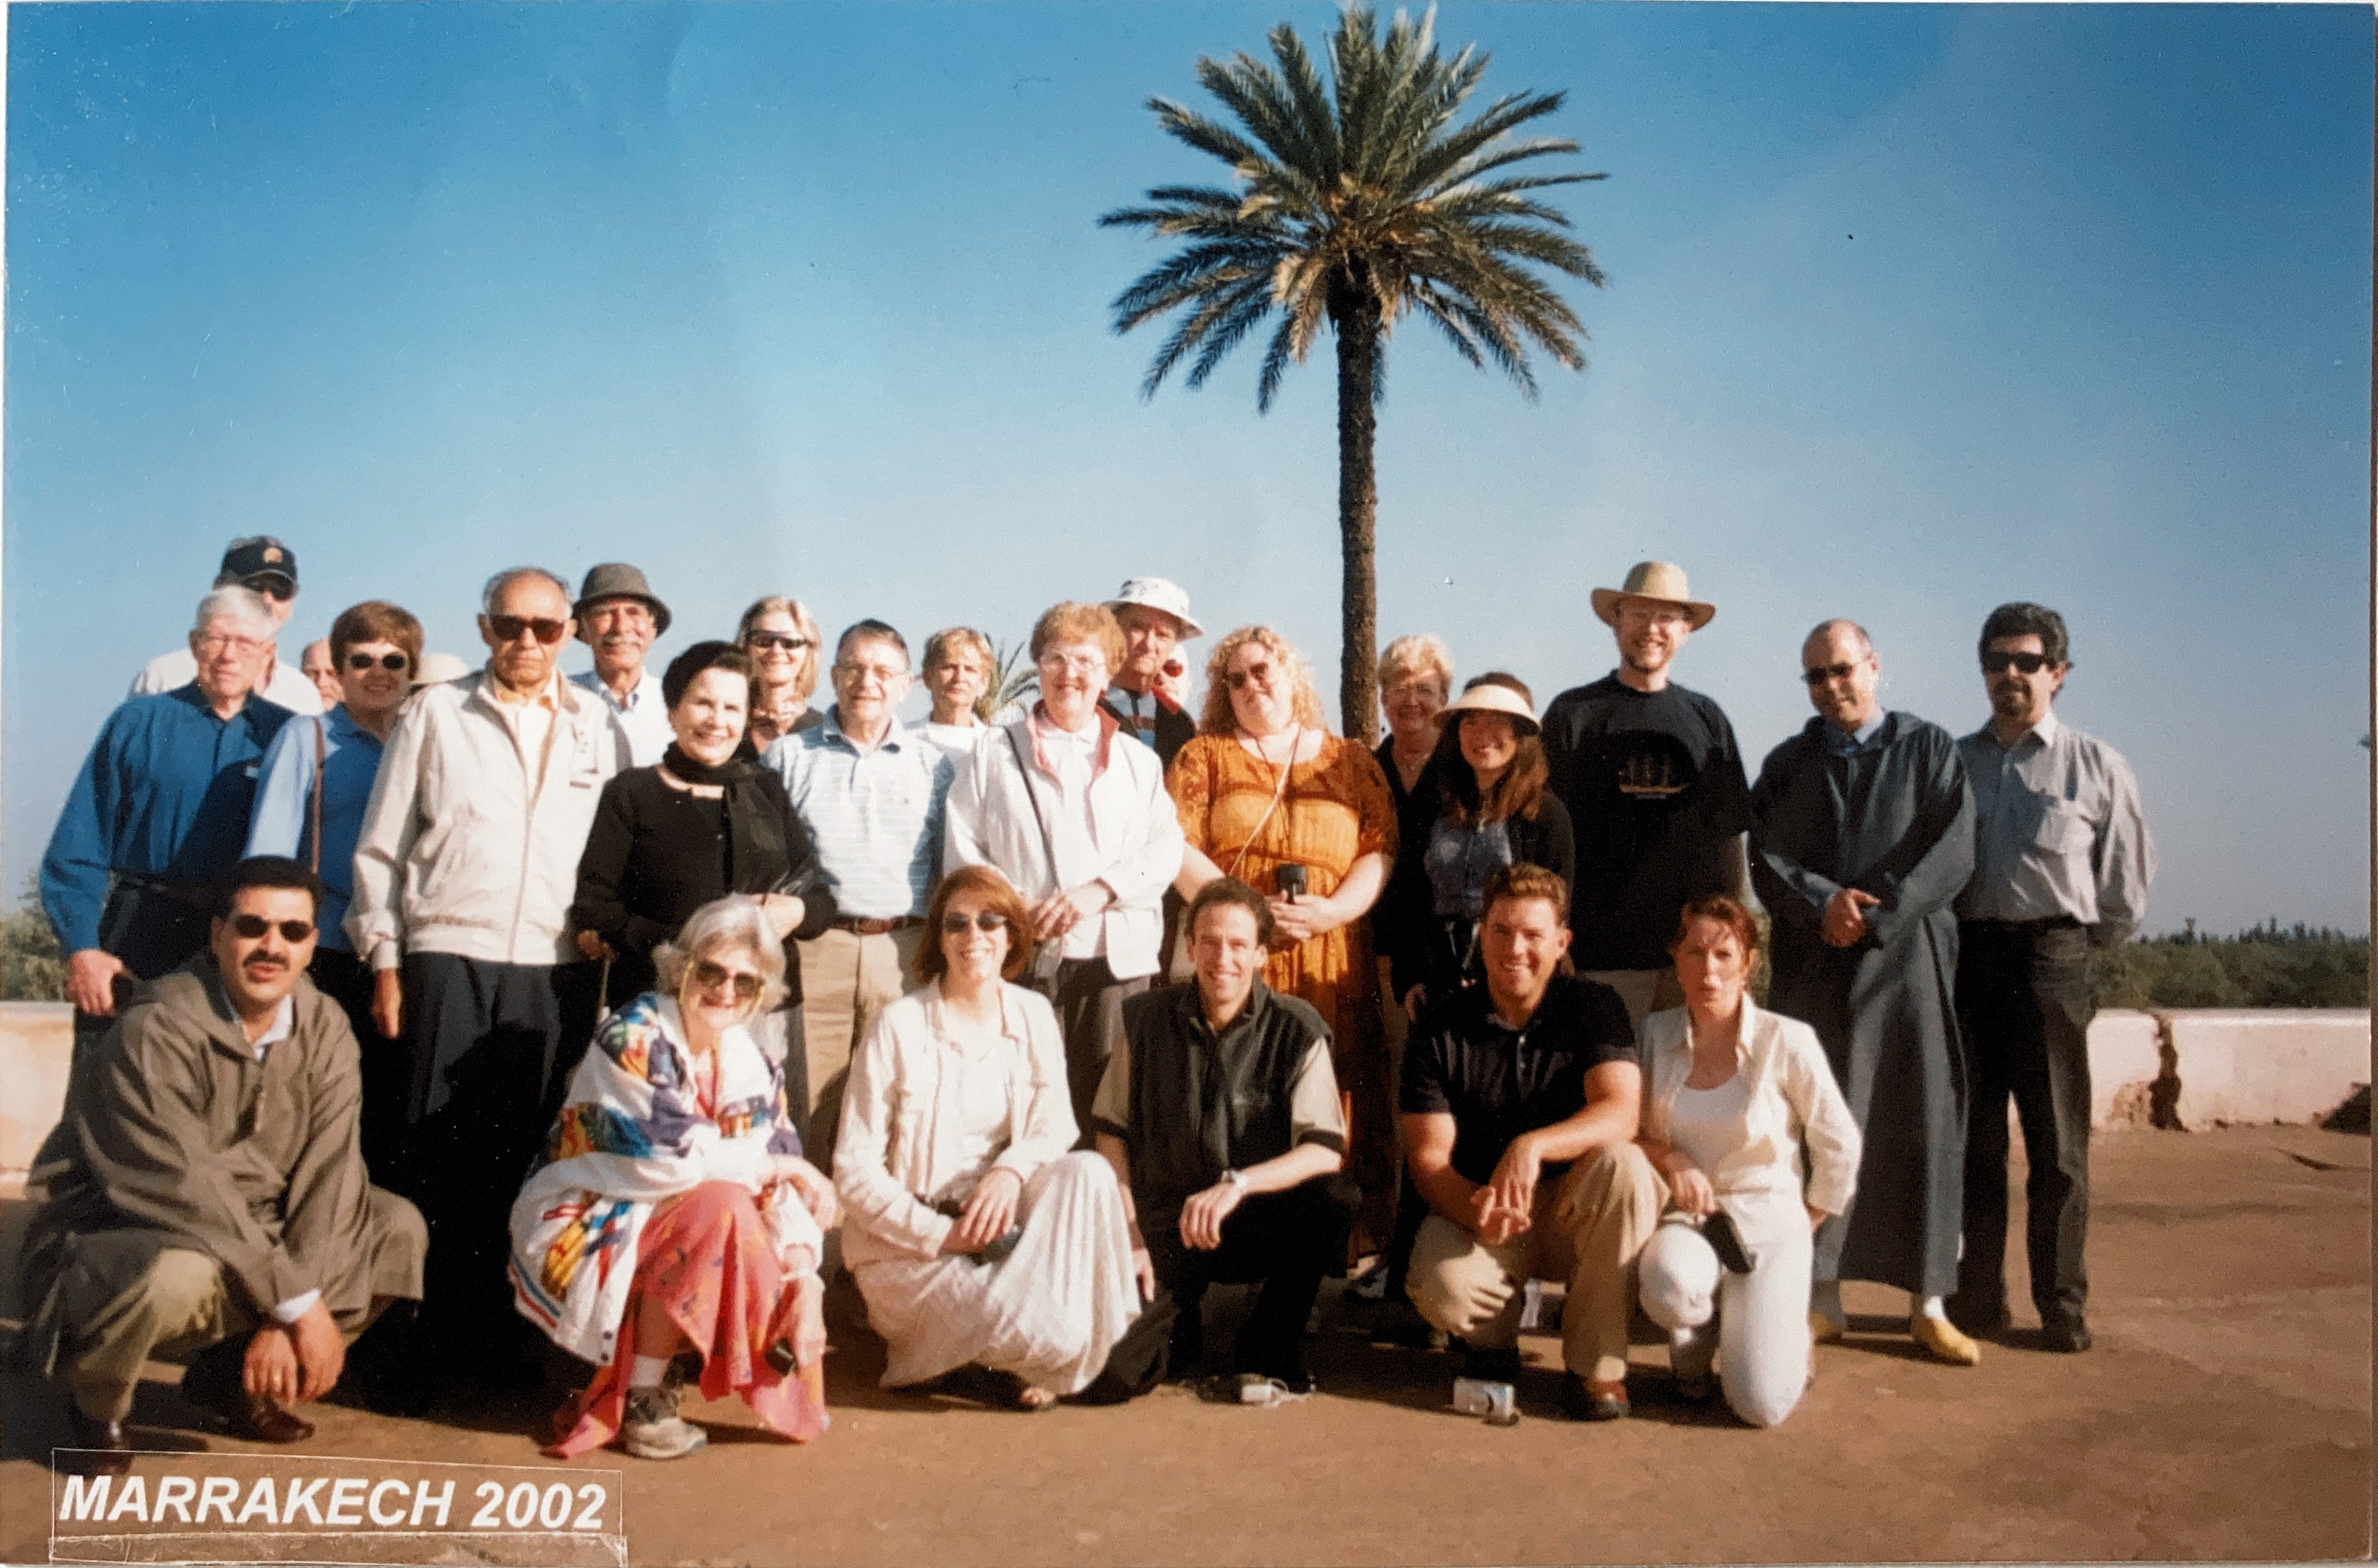 Group picture in Marrakech, 2002